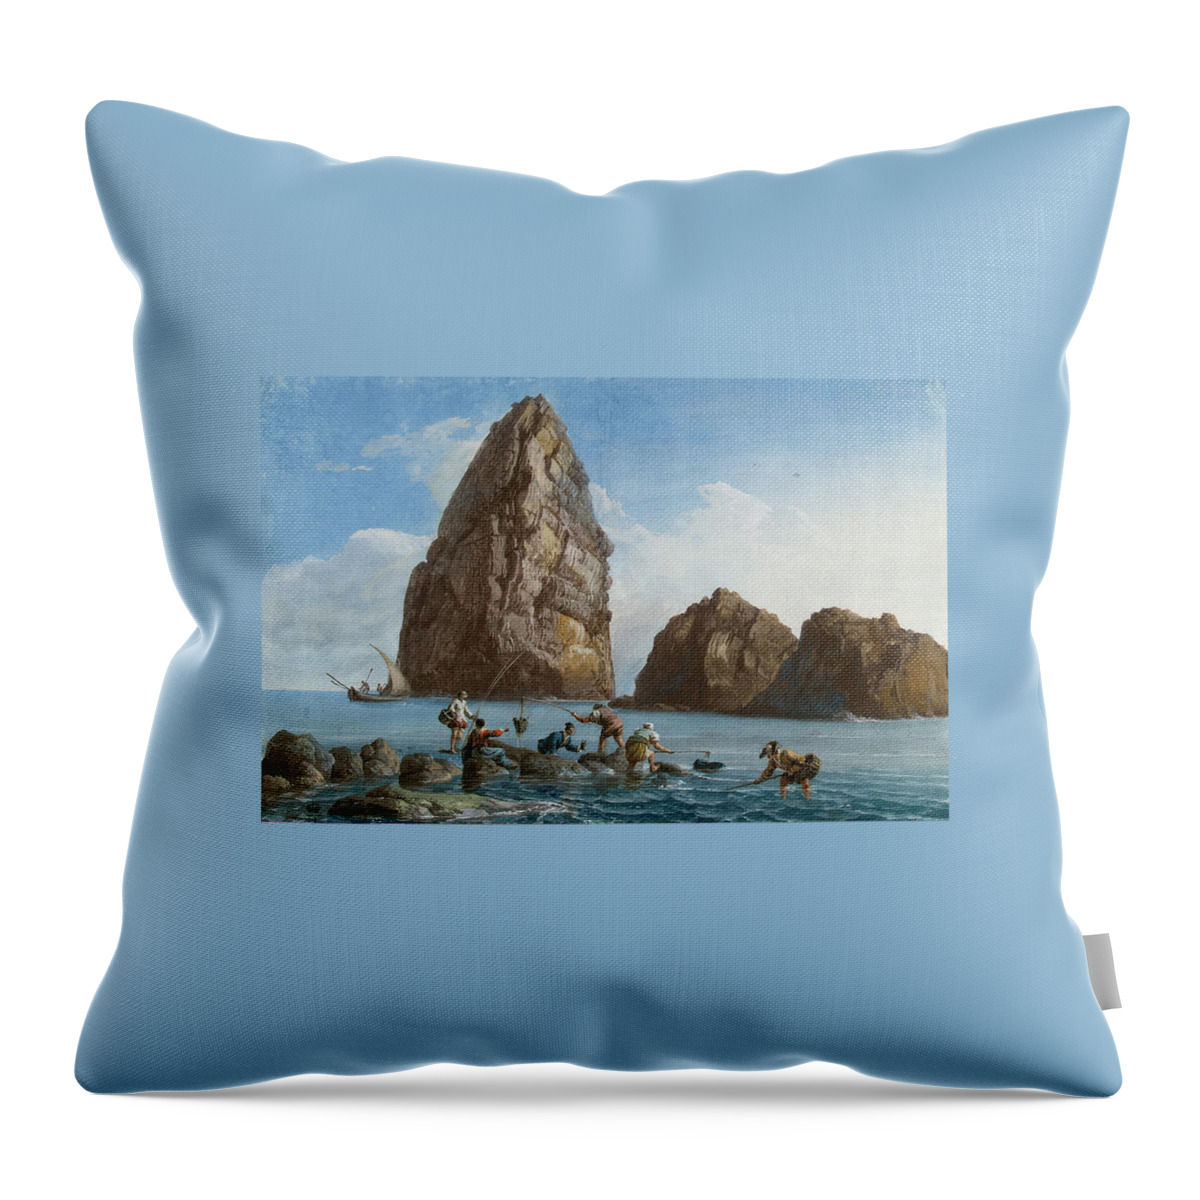 Jean-pierre-louis-laurent Houel Throw Pillow featuring the painting View of the Rocks on the Third Island of Cyclops by Jean-Pierre-Louis-Laurent Houel